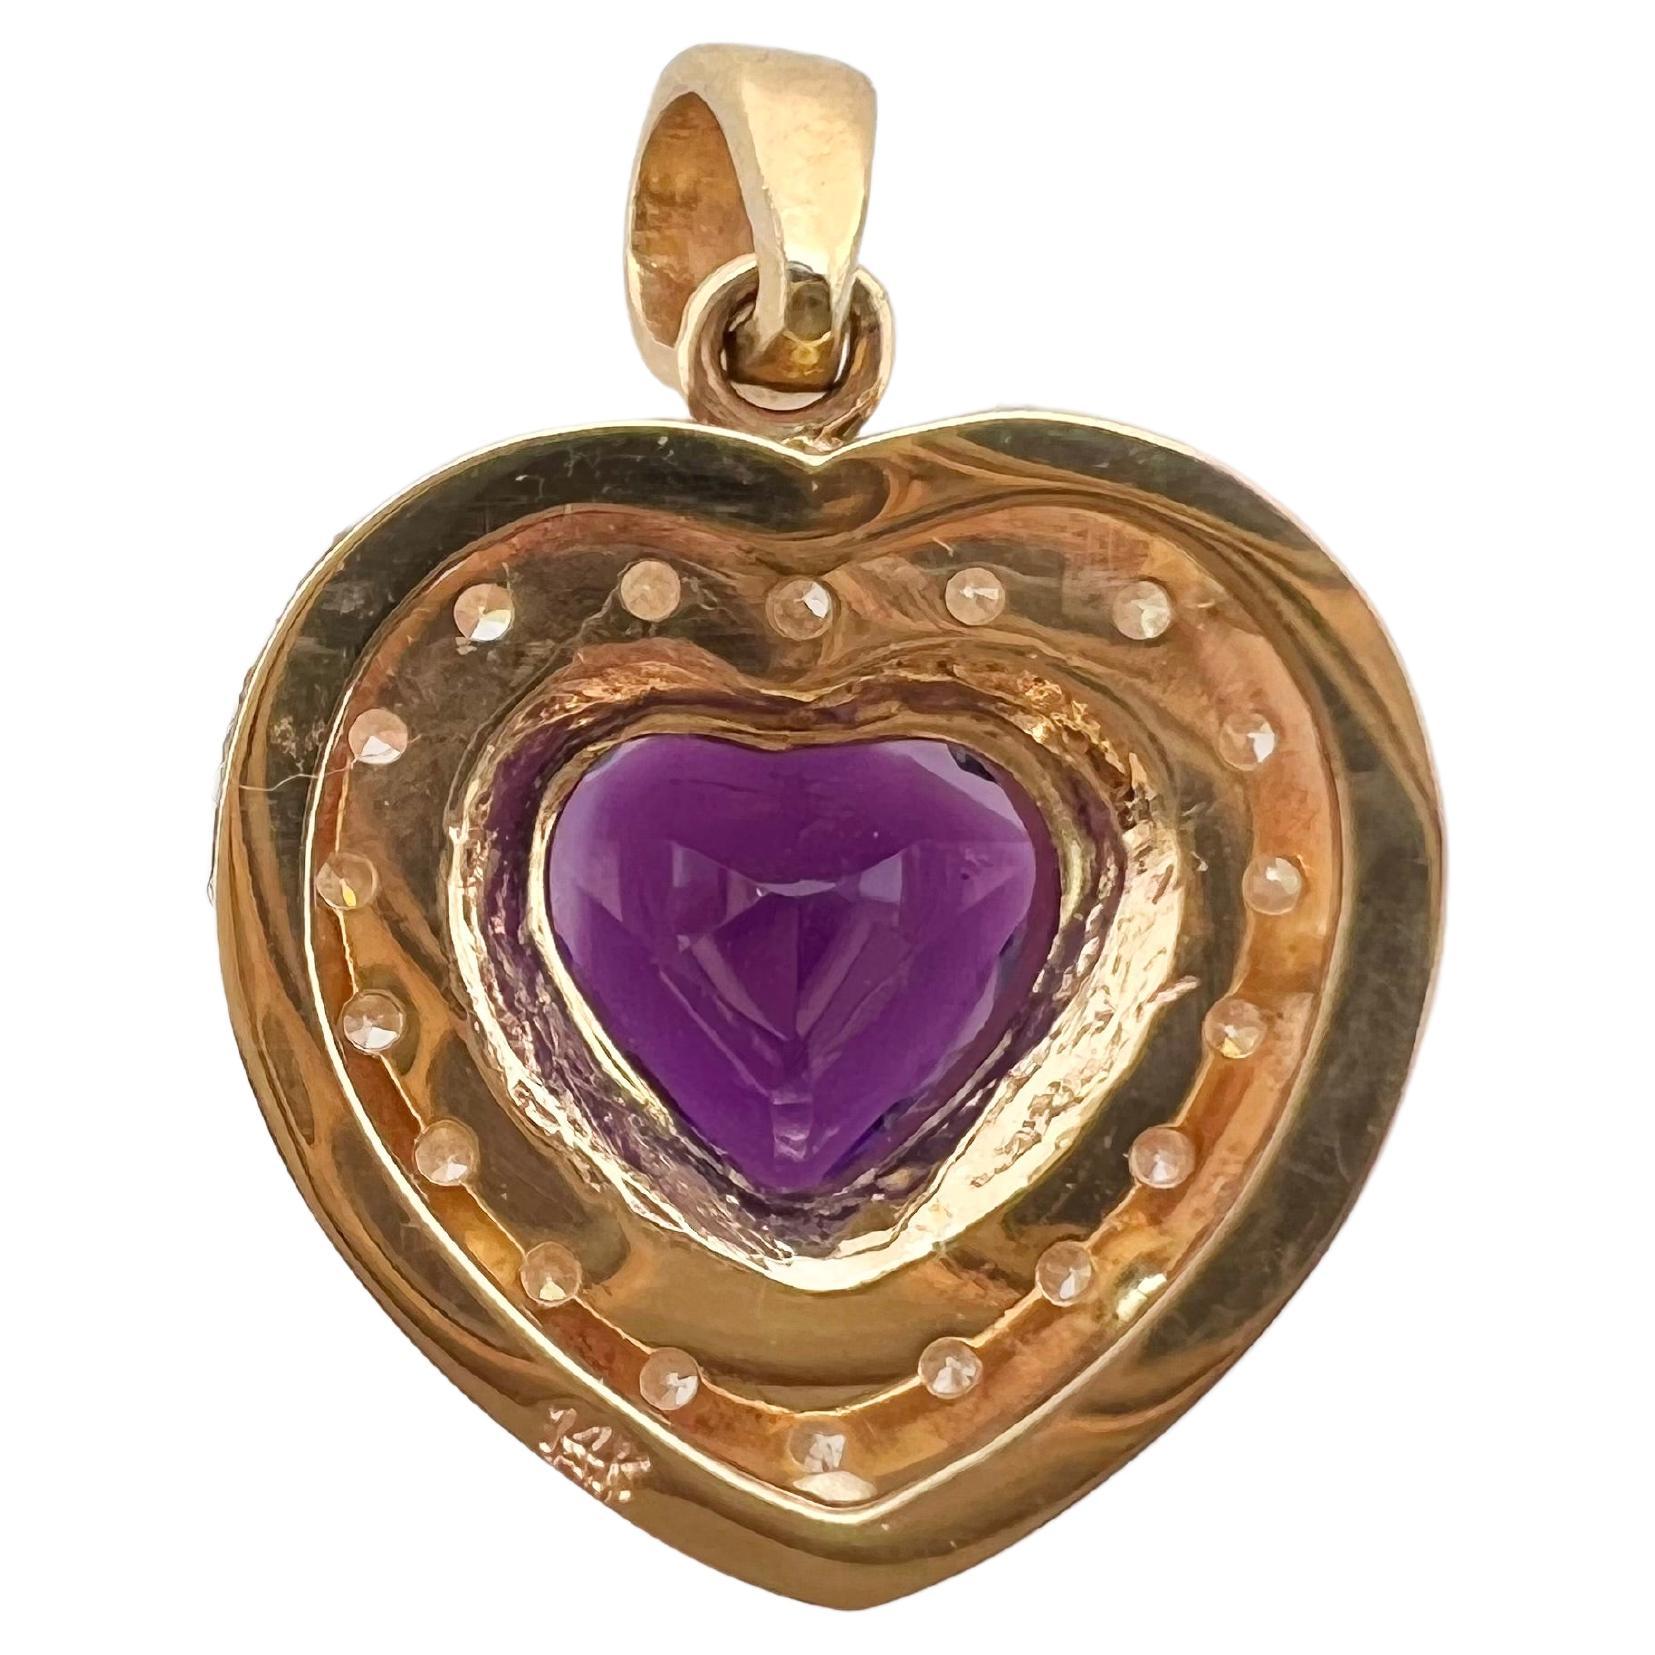 This beautiful, amethyst heart shaped pendant is set in 14k yellow gold with brilliant round diamonds.  This color contrast is stunning and will grasp everyone's attention!


Stone: Amethyst 2.50 cts 
Diamonds: 0.52 cts total weight 
Metal: 14k